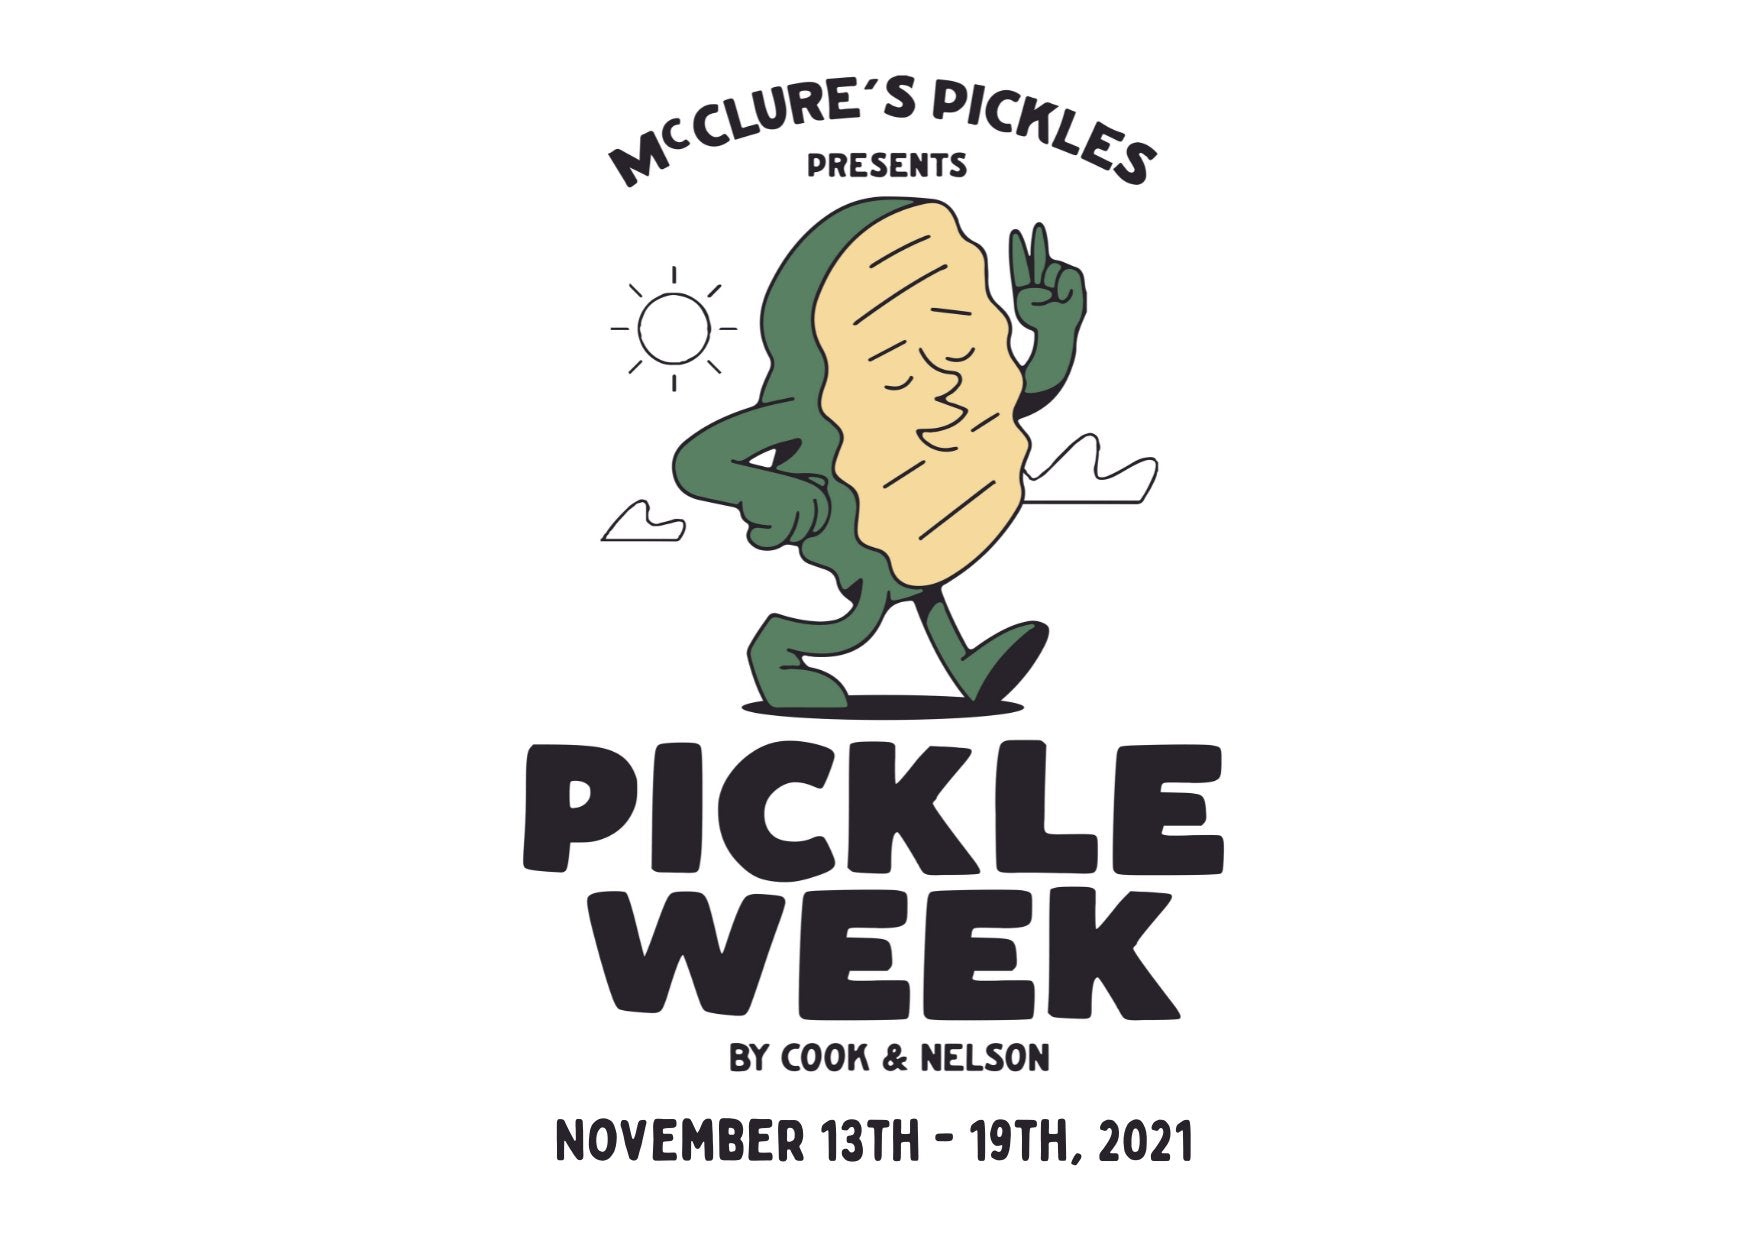 Pickle Week 2021: November 13th-19th 🥒 - Cook & Nelson